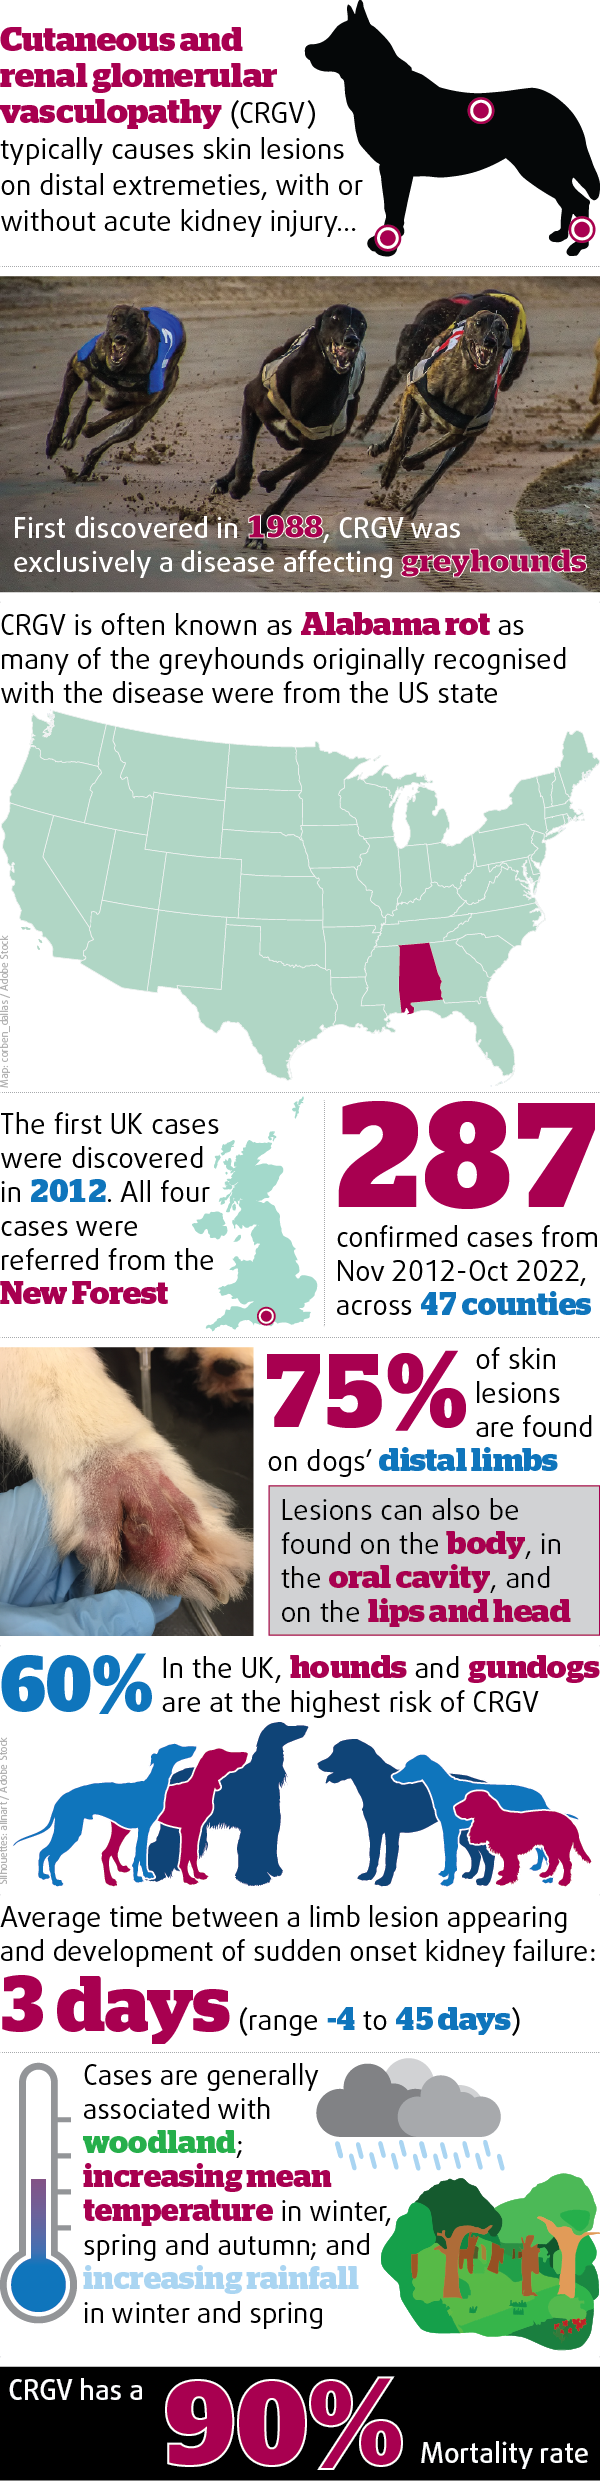 Alabama rot facts and stats.